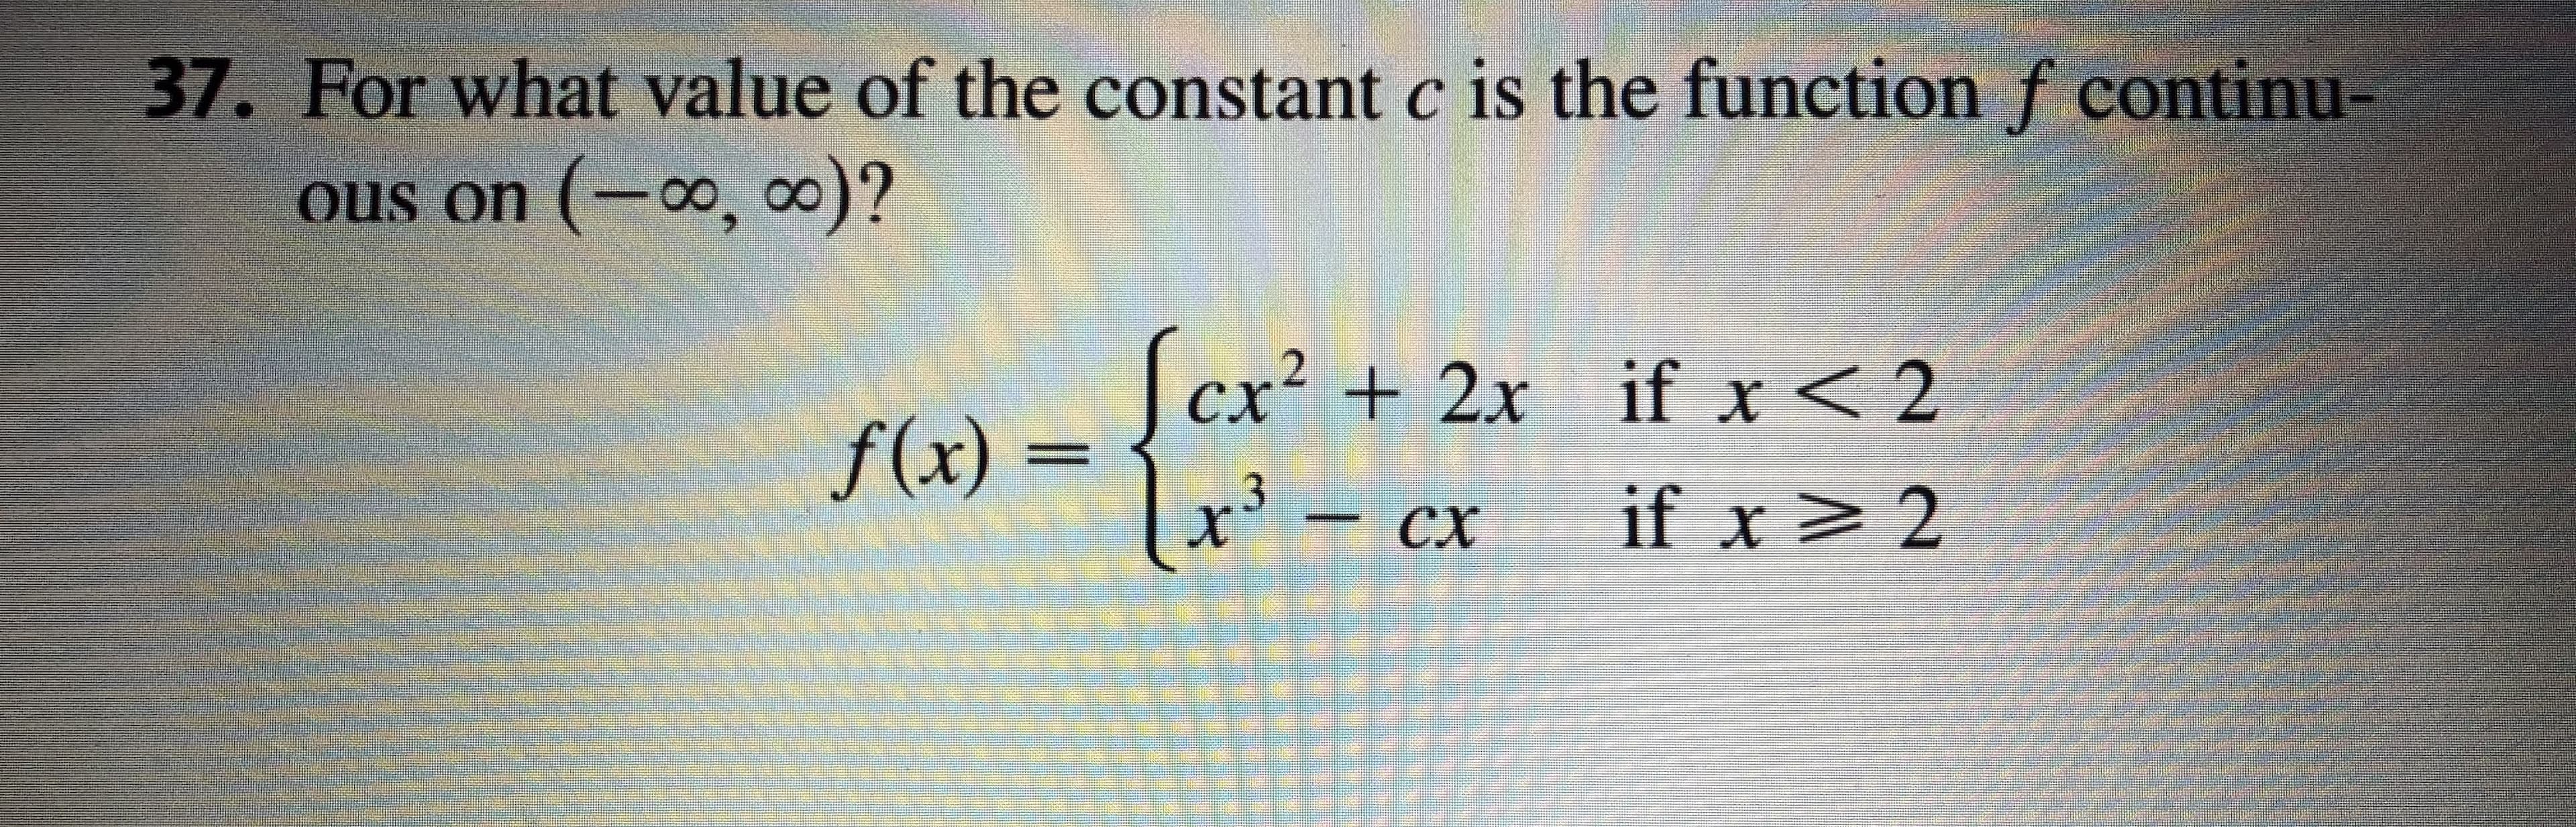 37. For what value of the constant c is the function f continu-
ous on (-∞, ∞)?
[cx² + 2x_if x< 2
f(x) =
x'- cx
сх
if x> 2
